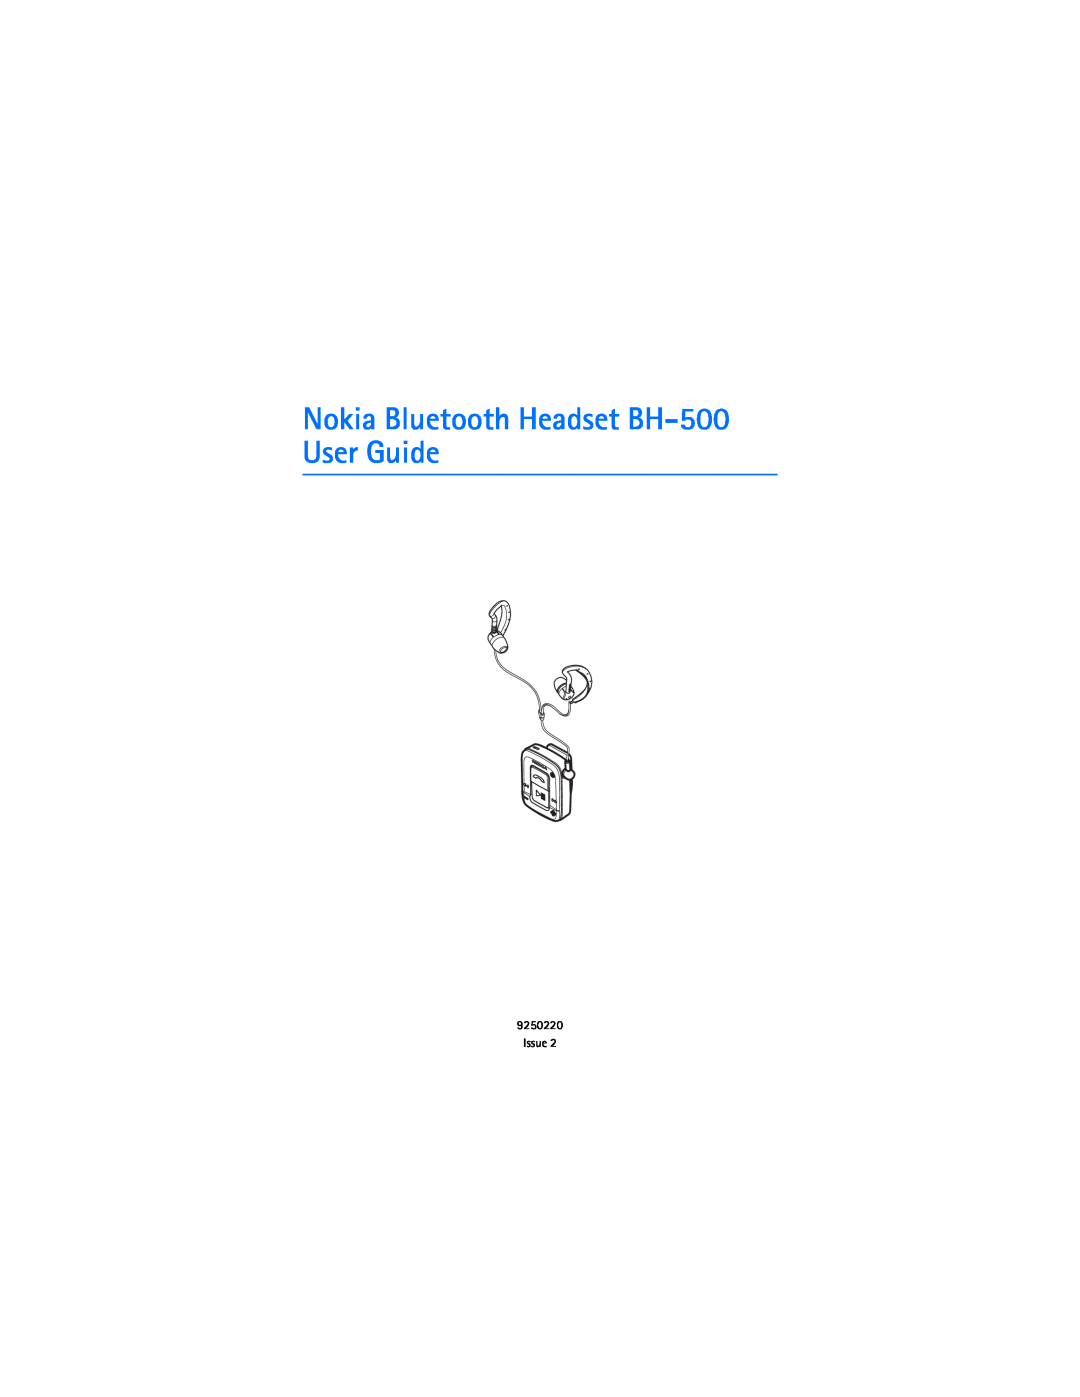 Nokia manual Nokia Bluetooth Headset BH-500User Guide, Issue 